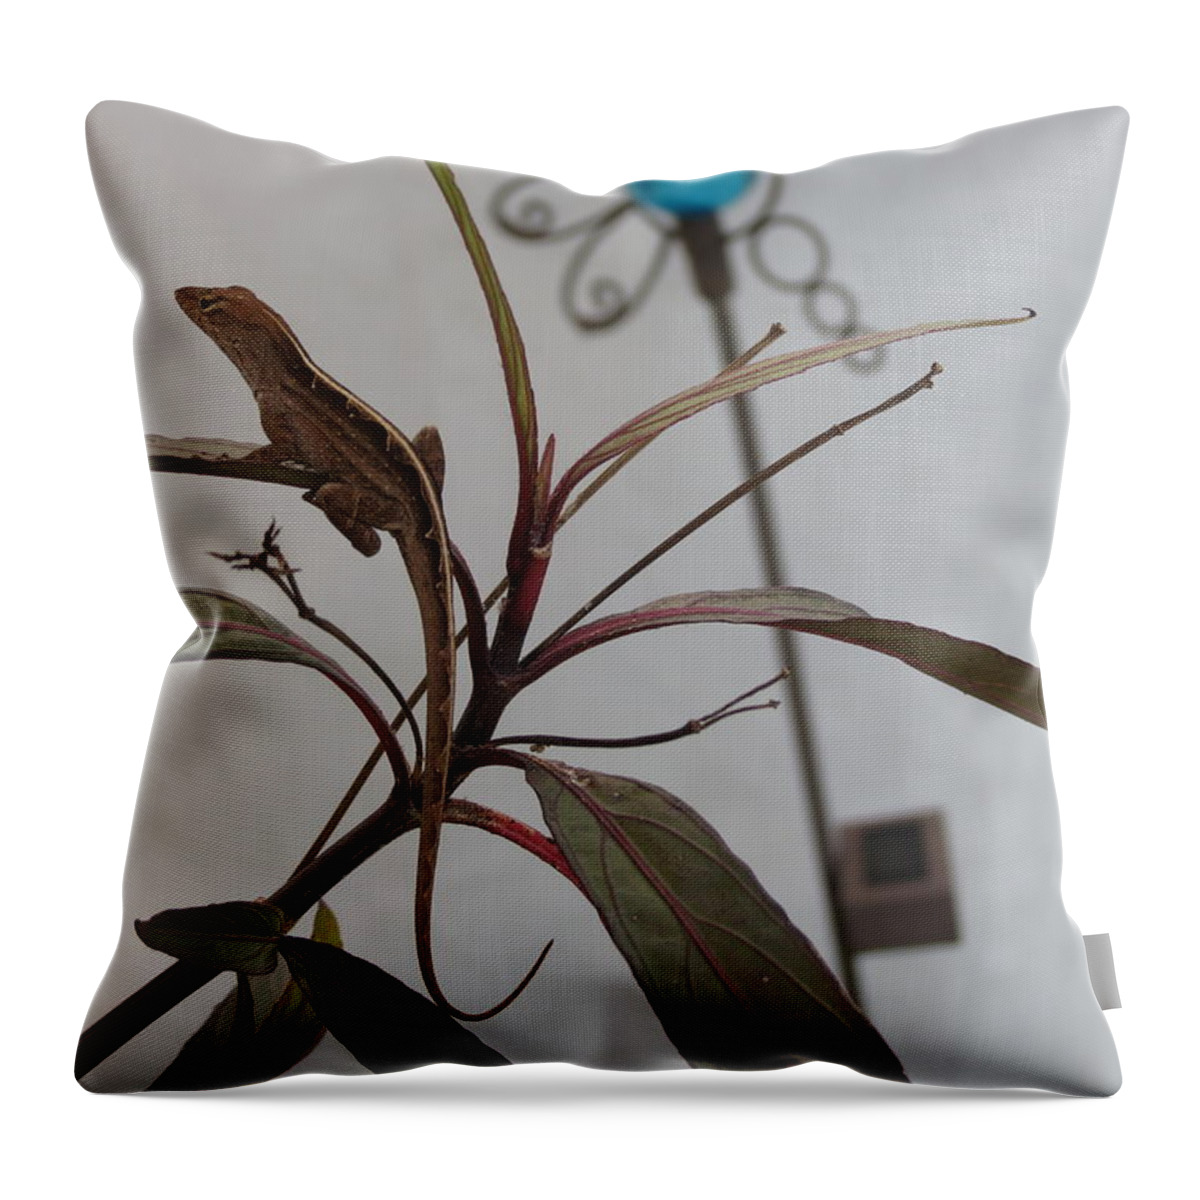 Lizard Throw Pillow featuring the photograph Leaping Lizard by Fortunate Findings Shirley Dickerson